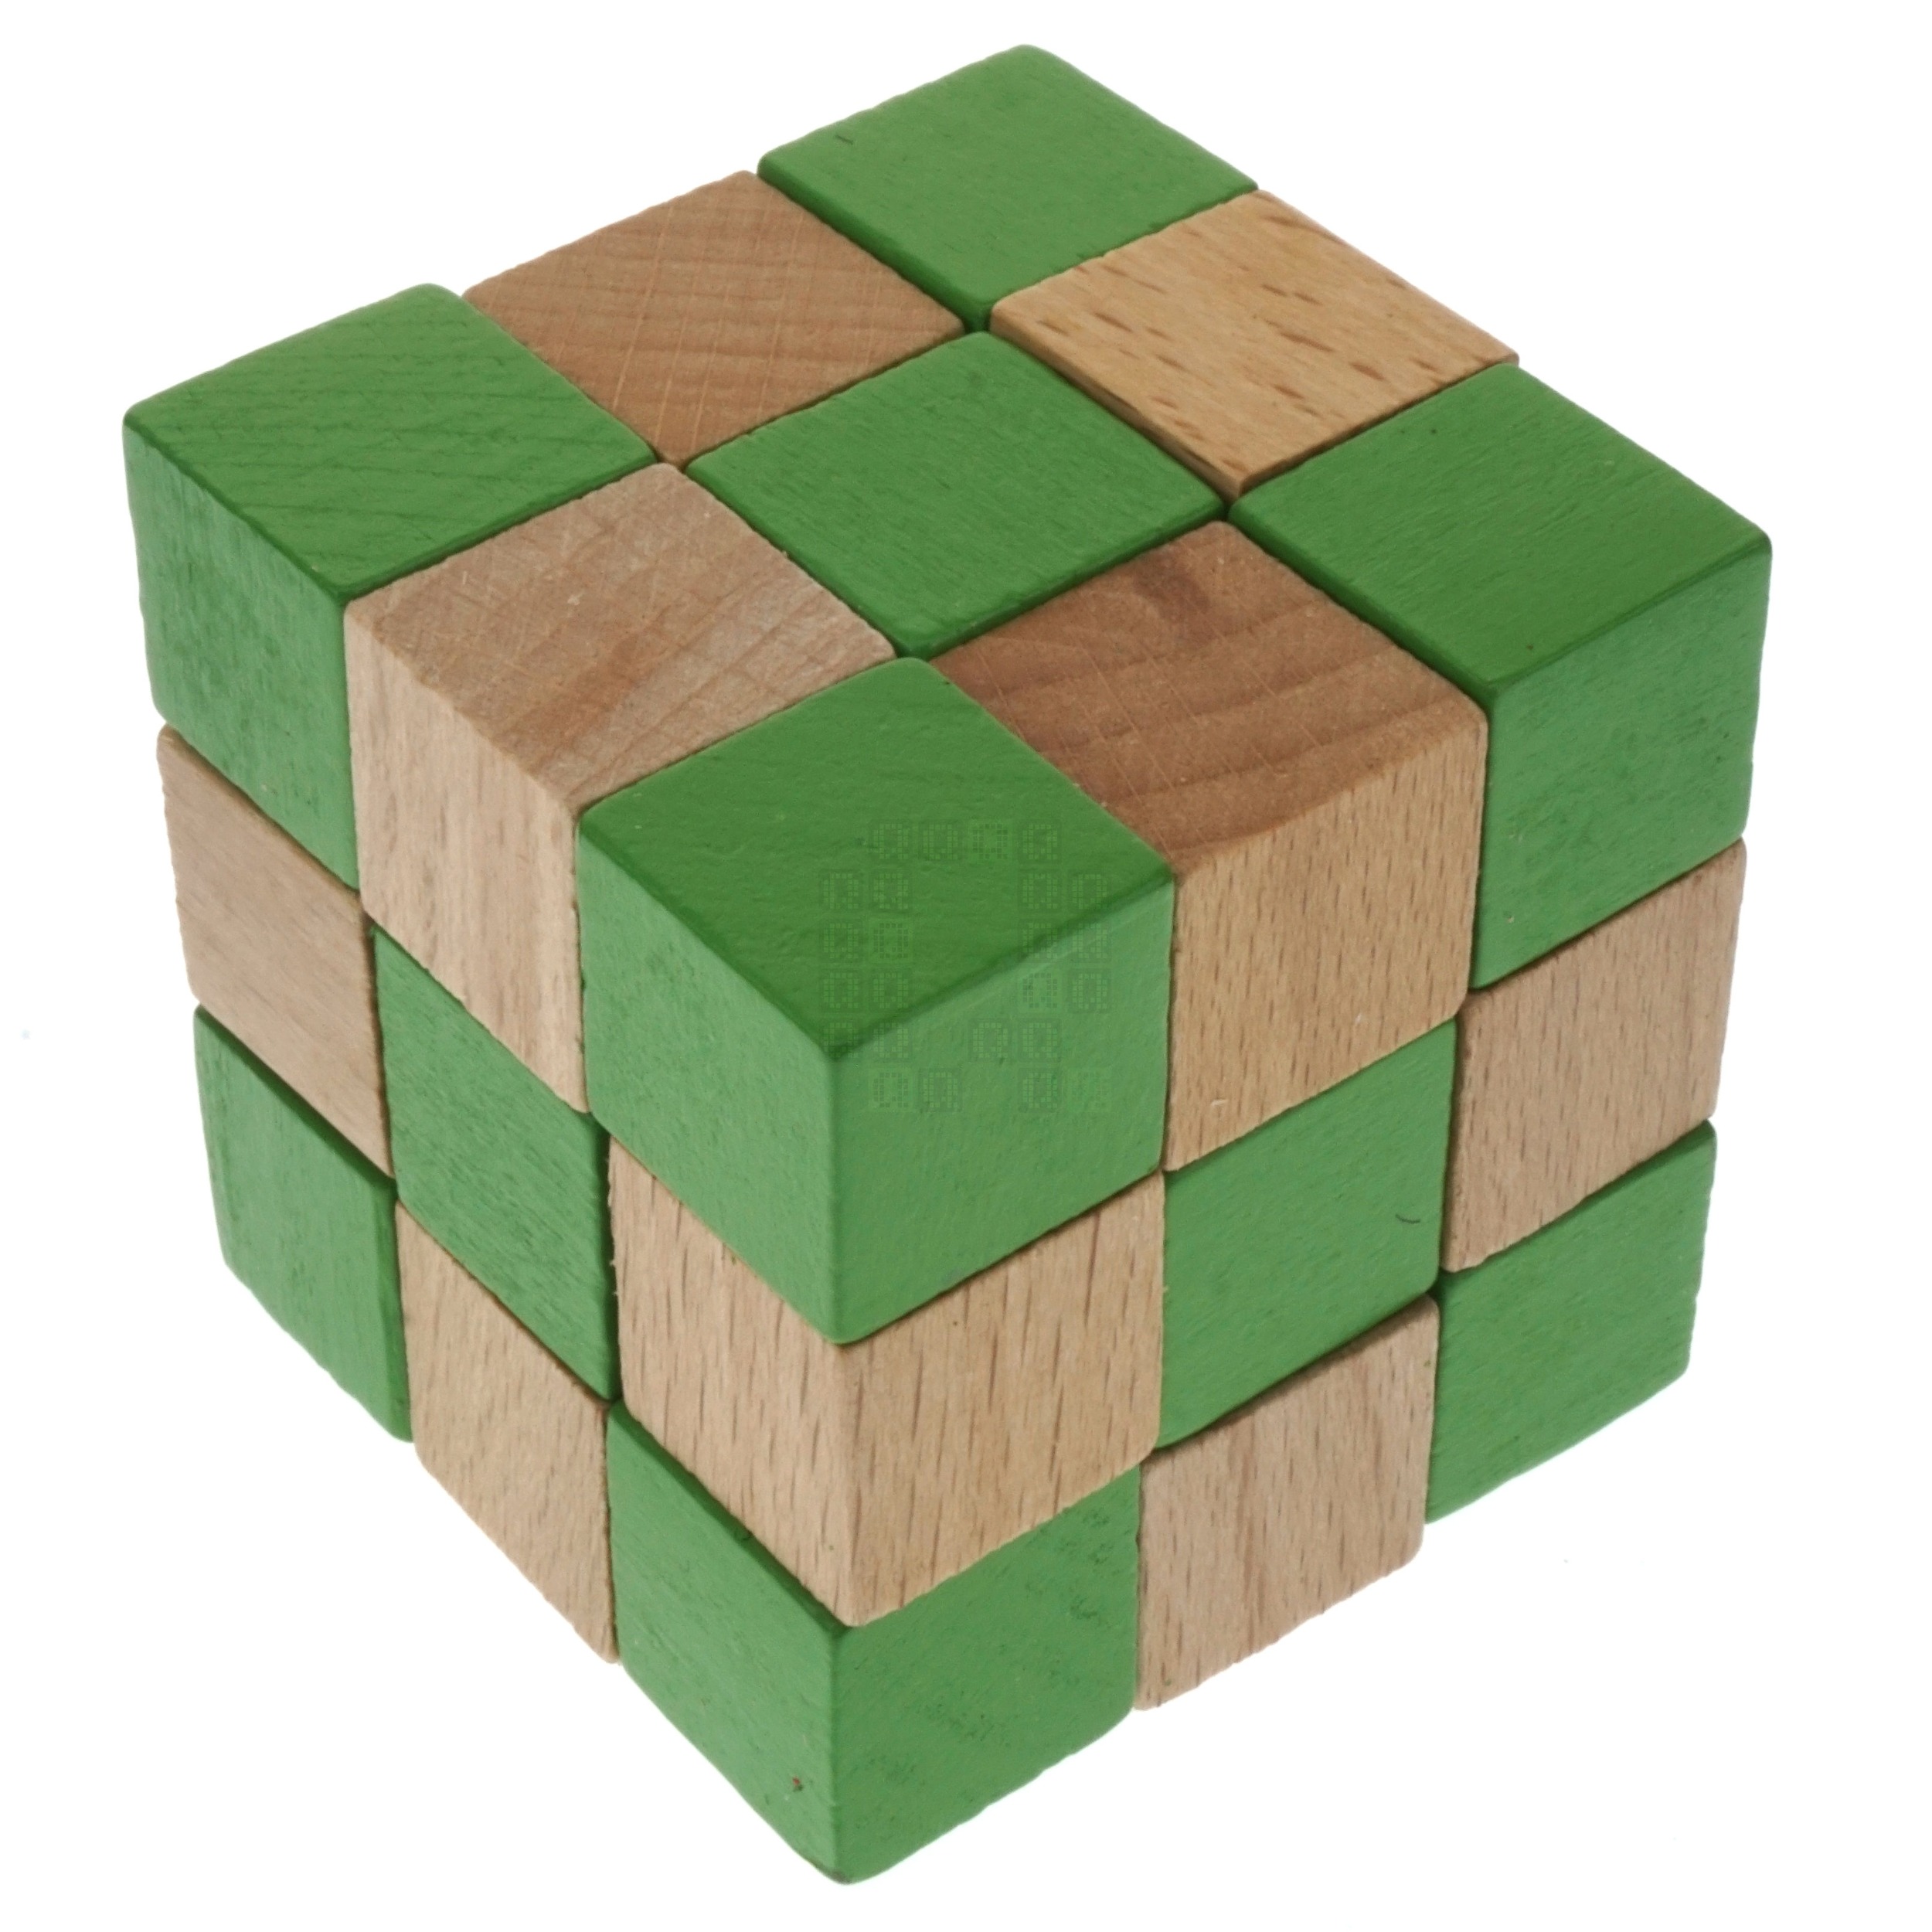 Wooden Cube Puzzle, Green/Natural